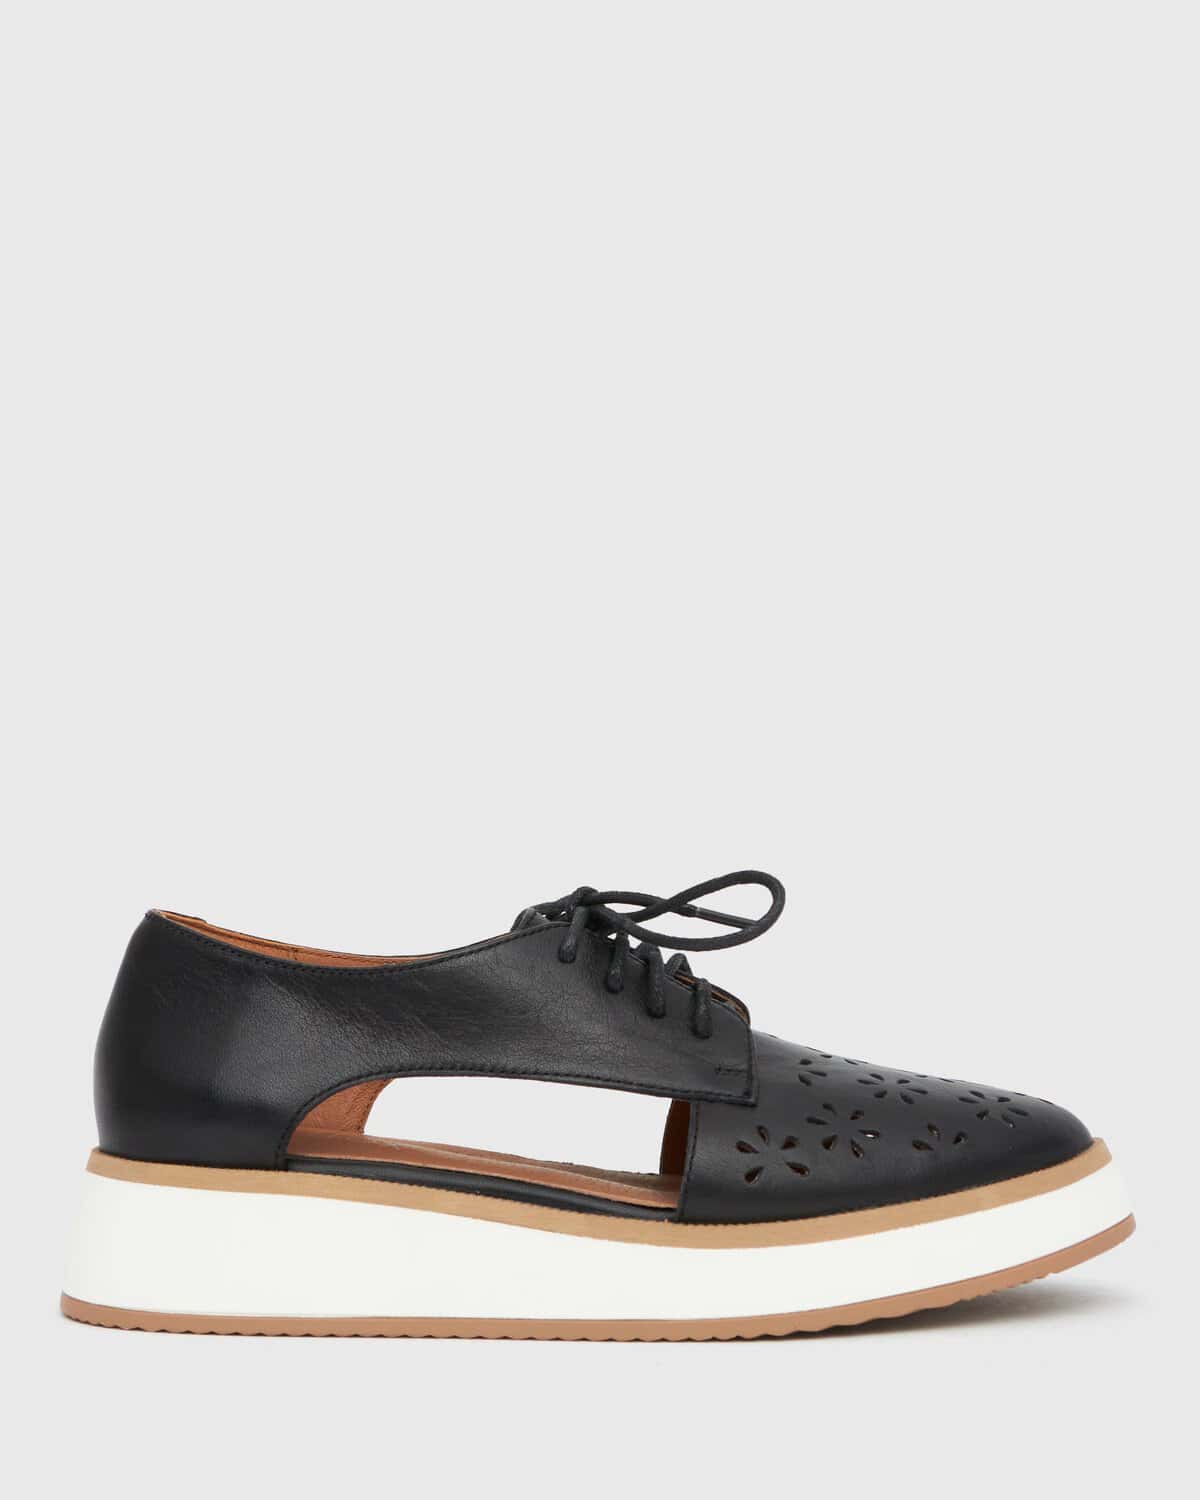 Shop the Latest Collection of Betts Shoes | Find Your Perfect Pair